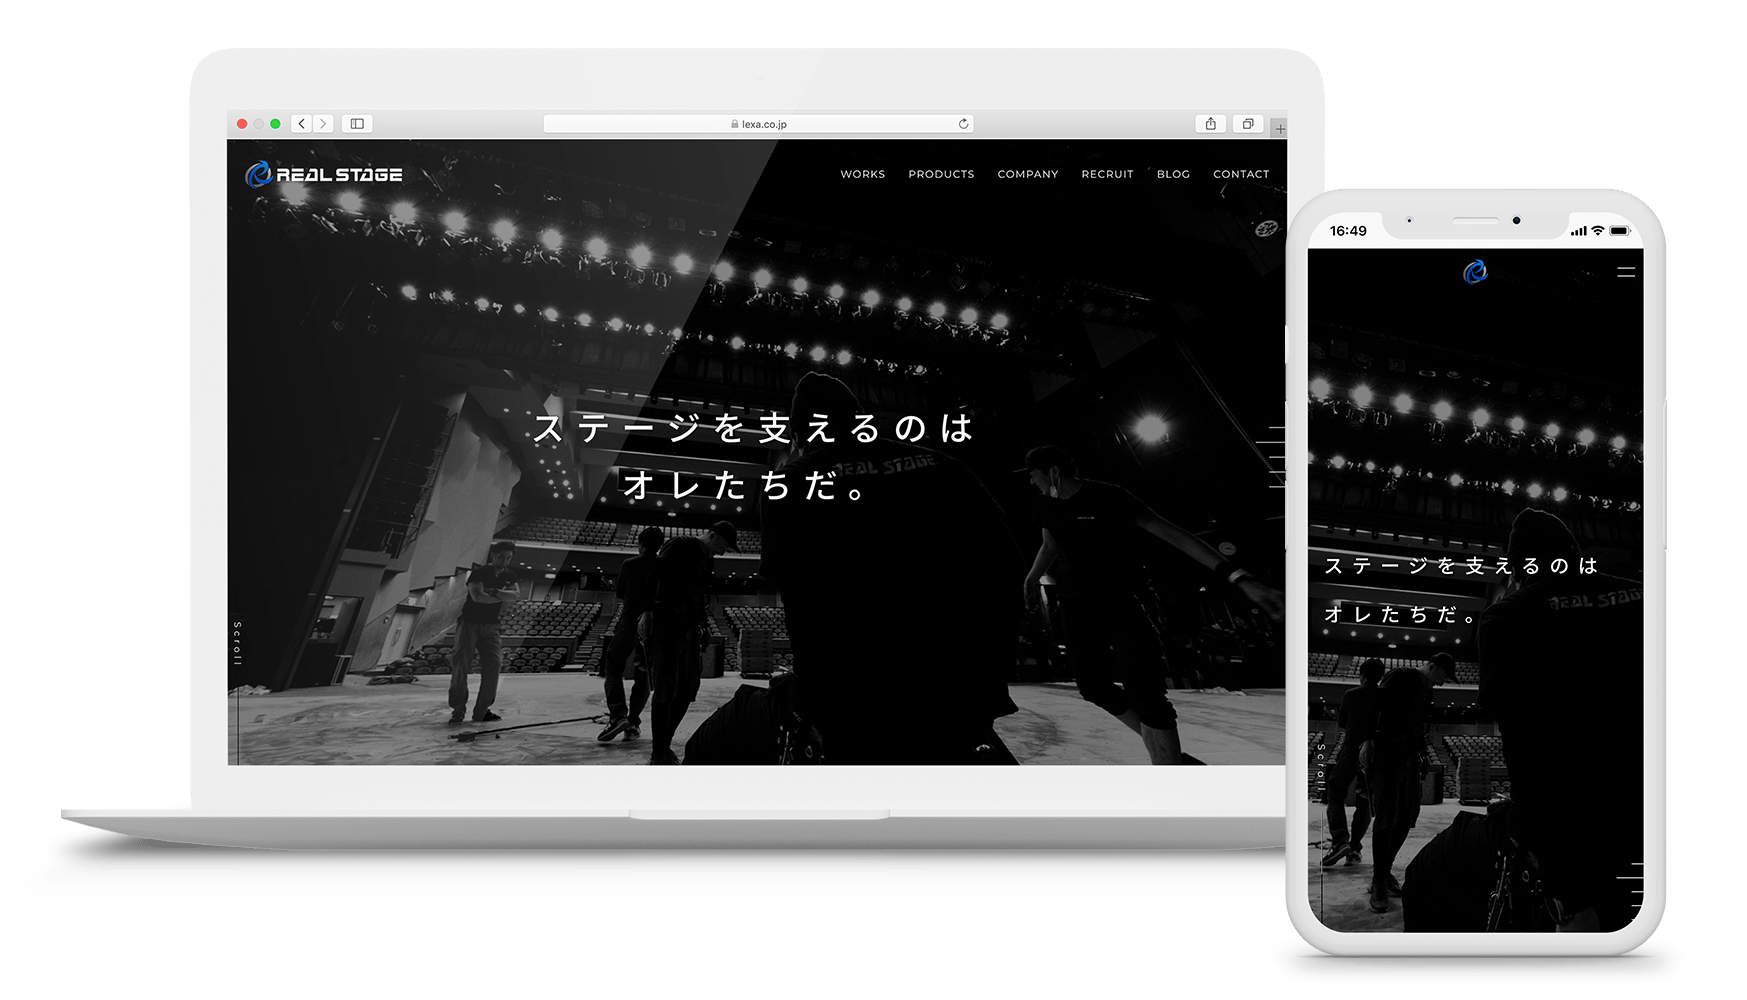 REAL STAGE Corporate Site